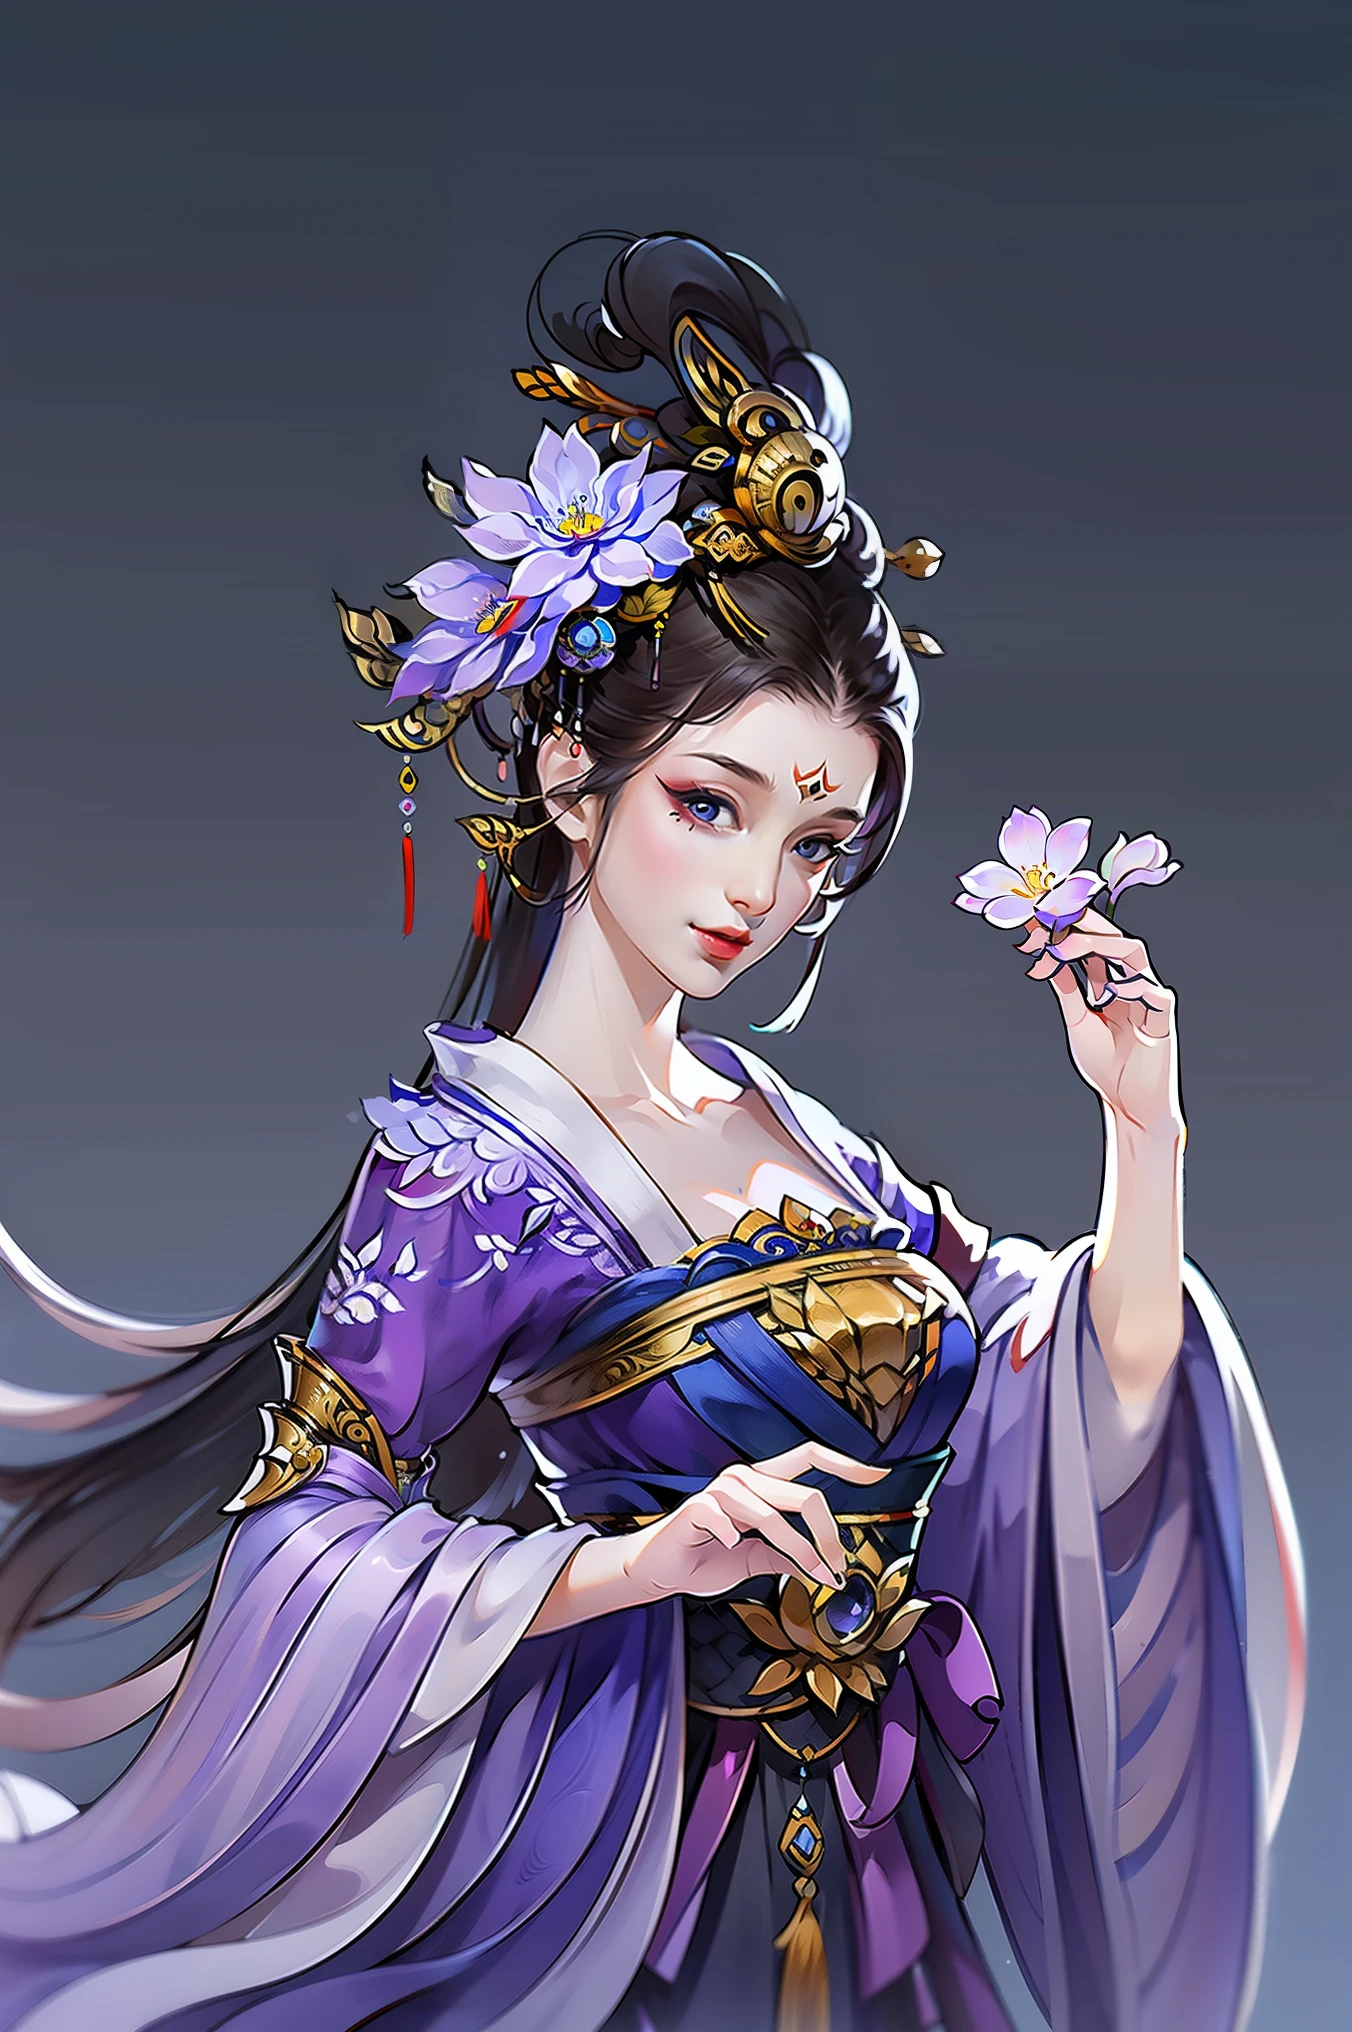 （masterpiece，super detailed，HD details，highly detailed art）1 girl，Half body，xianxia，monochrome，purple dress，Wisteria flowers，elegant，Highly detailed character designs from East Asia，Game character costume design，simple，ultra high resolution, sharp focus, epic work, masterpiece, (Very detailed CG unified 8k wallpaper)，pretty face，beautiful eyes，HD details